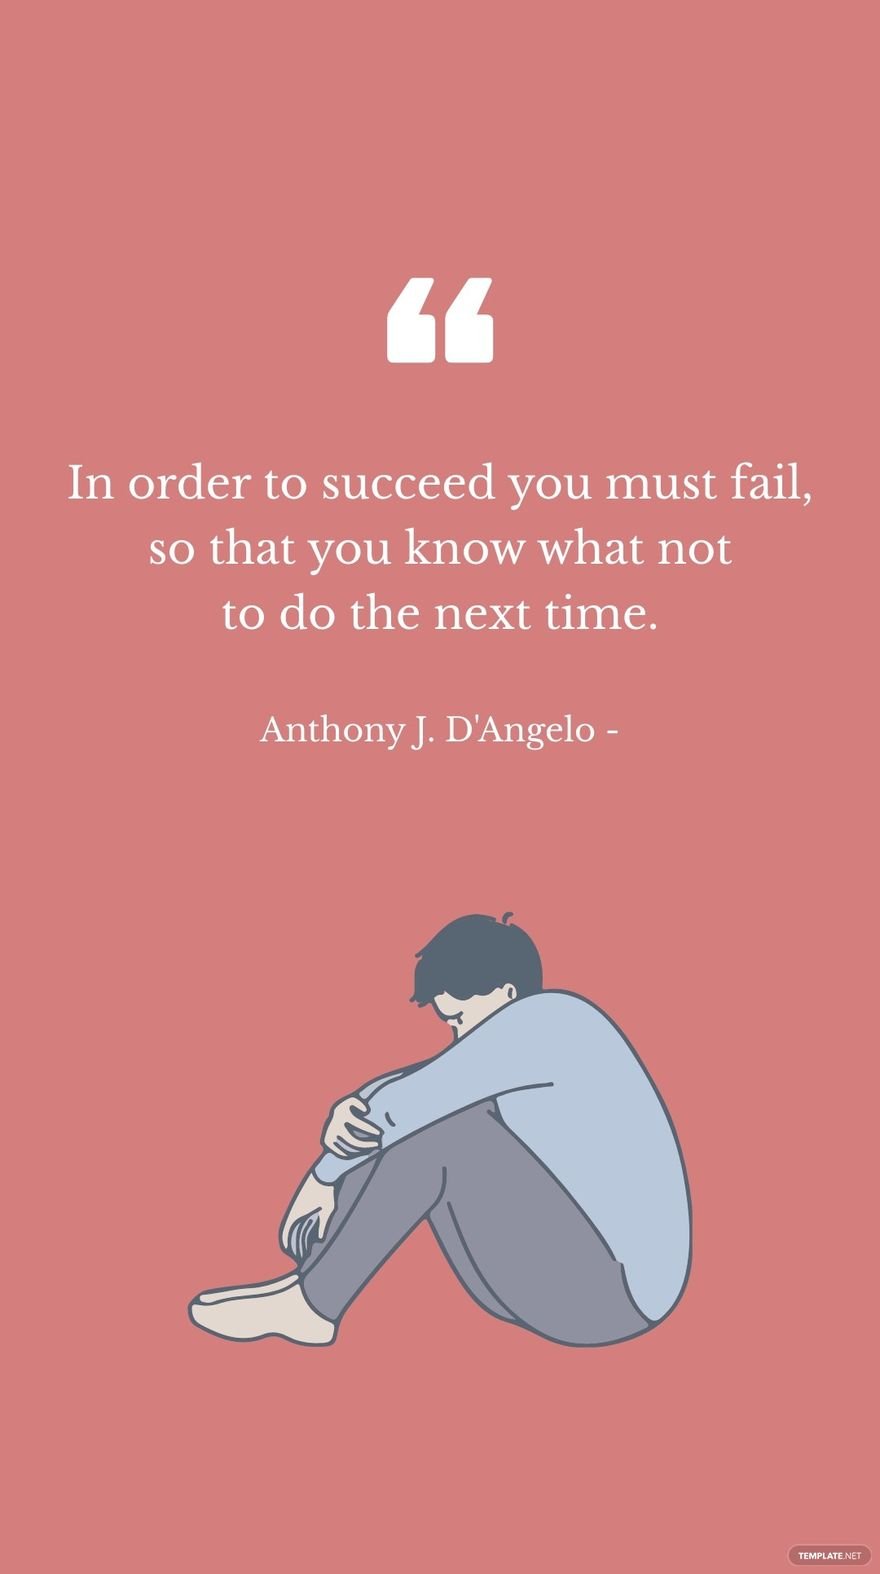 Free Anthony J. D'Angelo -  In order to succeed you must fail, so that you know what not to do the next time. in JPG